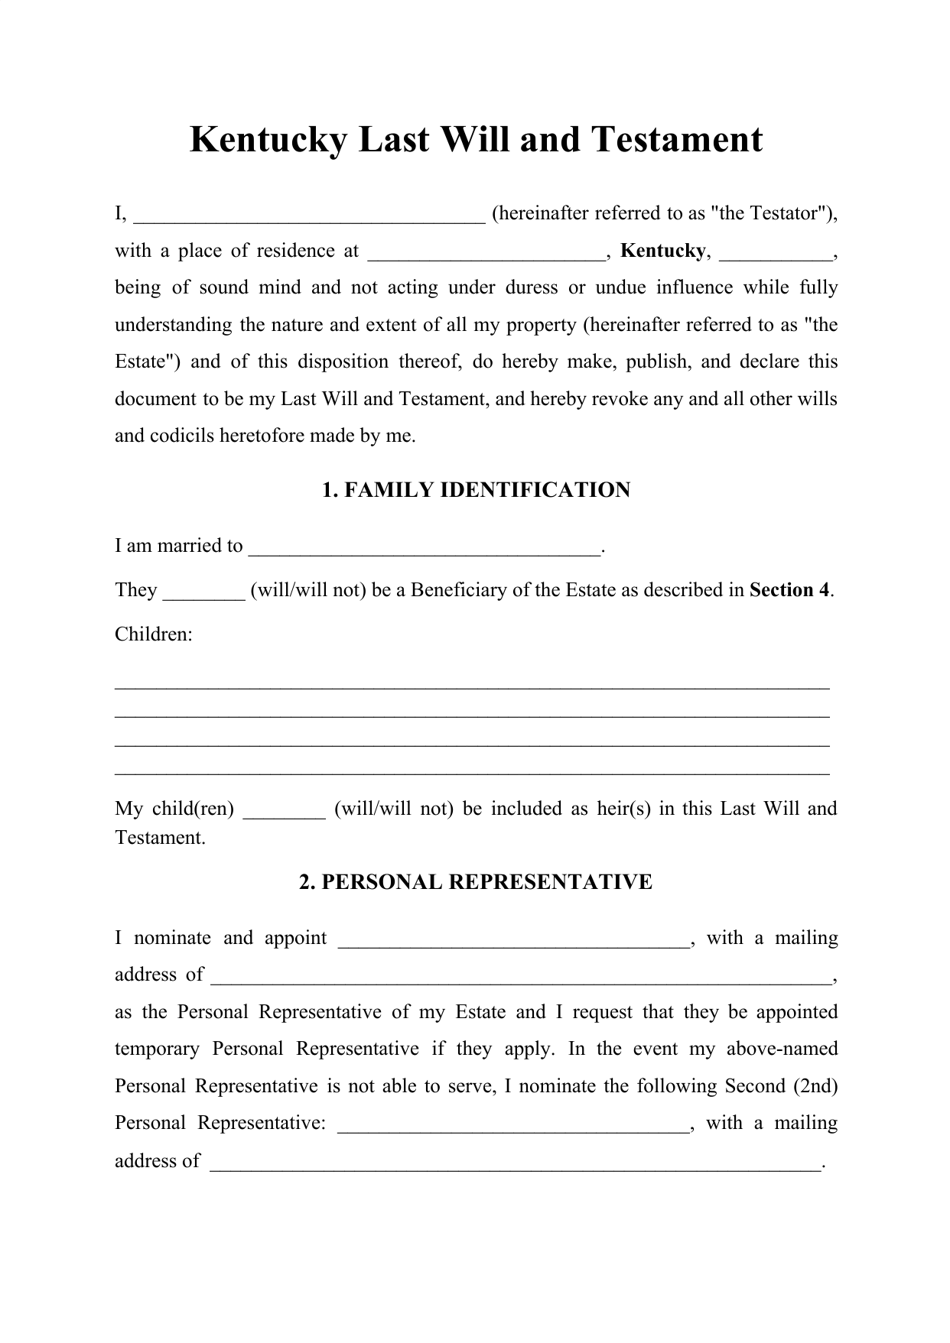 Last Will and Testament Template for Kentucky